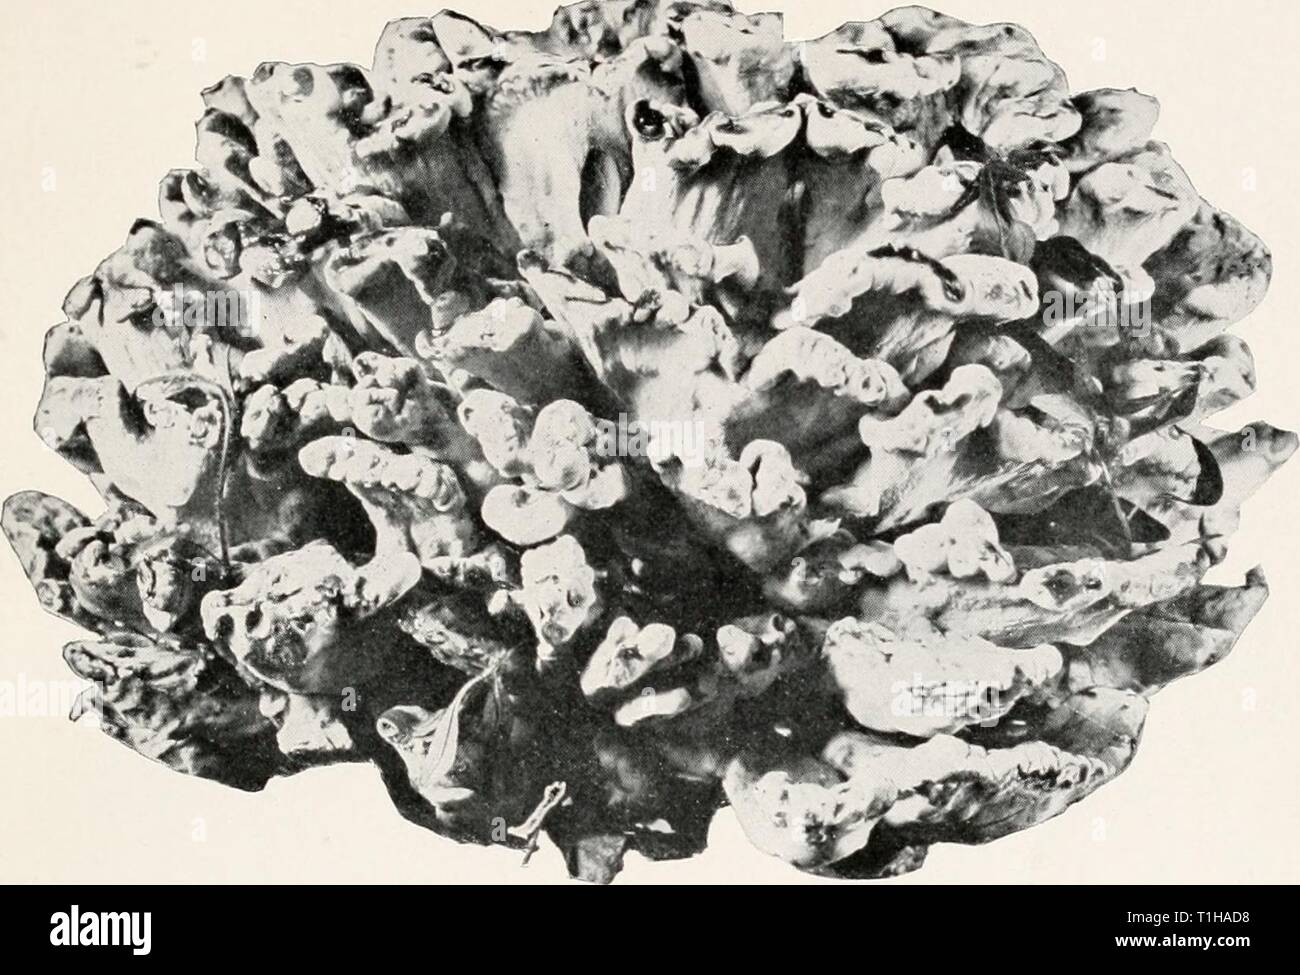 Diseases of deciduous forest trees Diseases of deciduous forest trees  diseasesofdecidu00schruoft Year: 1909  Bui. 149, Bureau of Plant Industry, U. S. Dept. of Agriculture. Plate IV fT:'-.    Fig. 1.—Fruiting Body of Polyporus sulphureus. Stock Photo